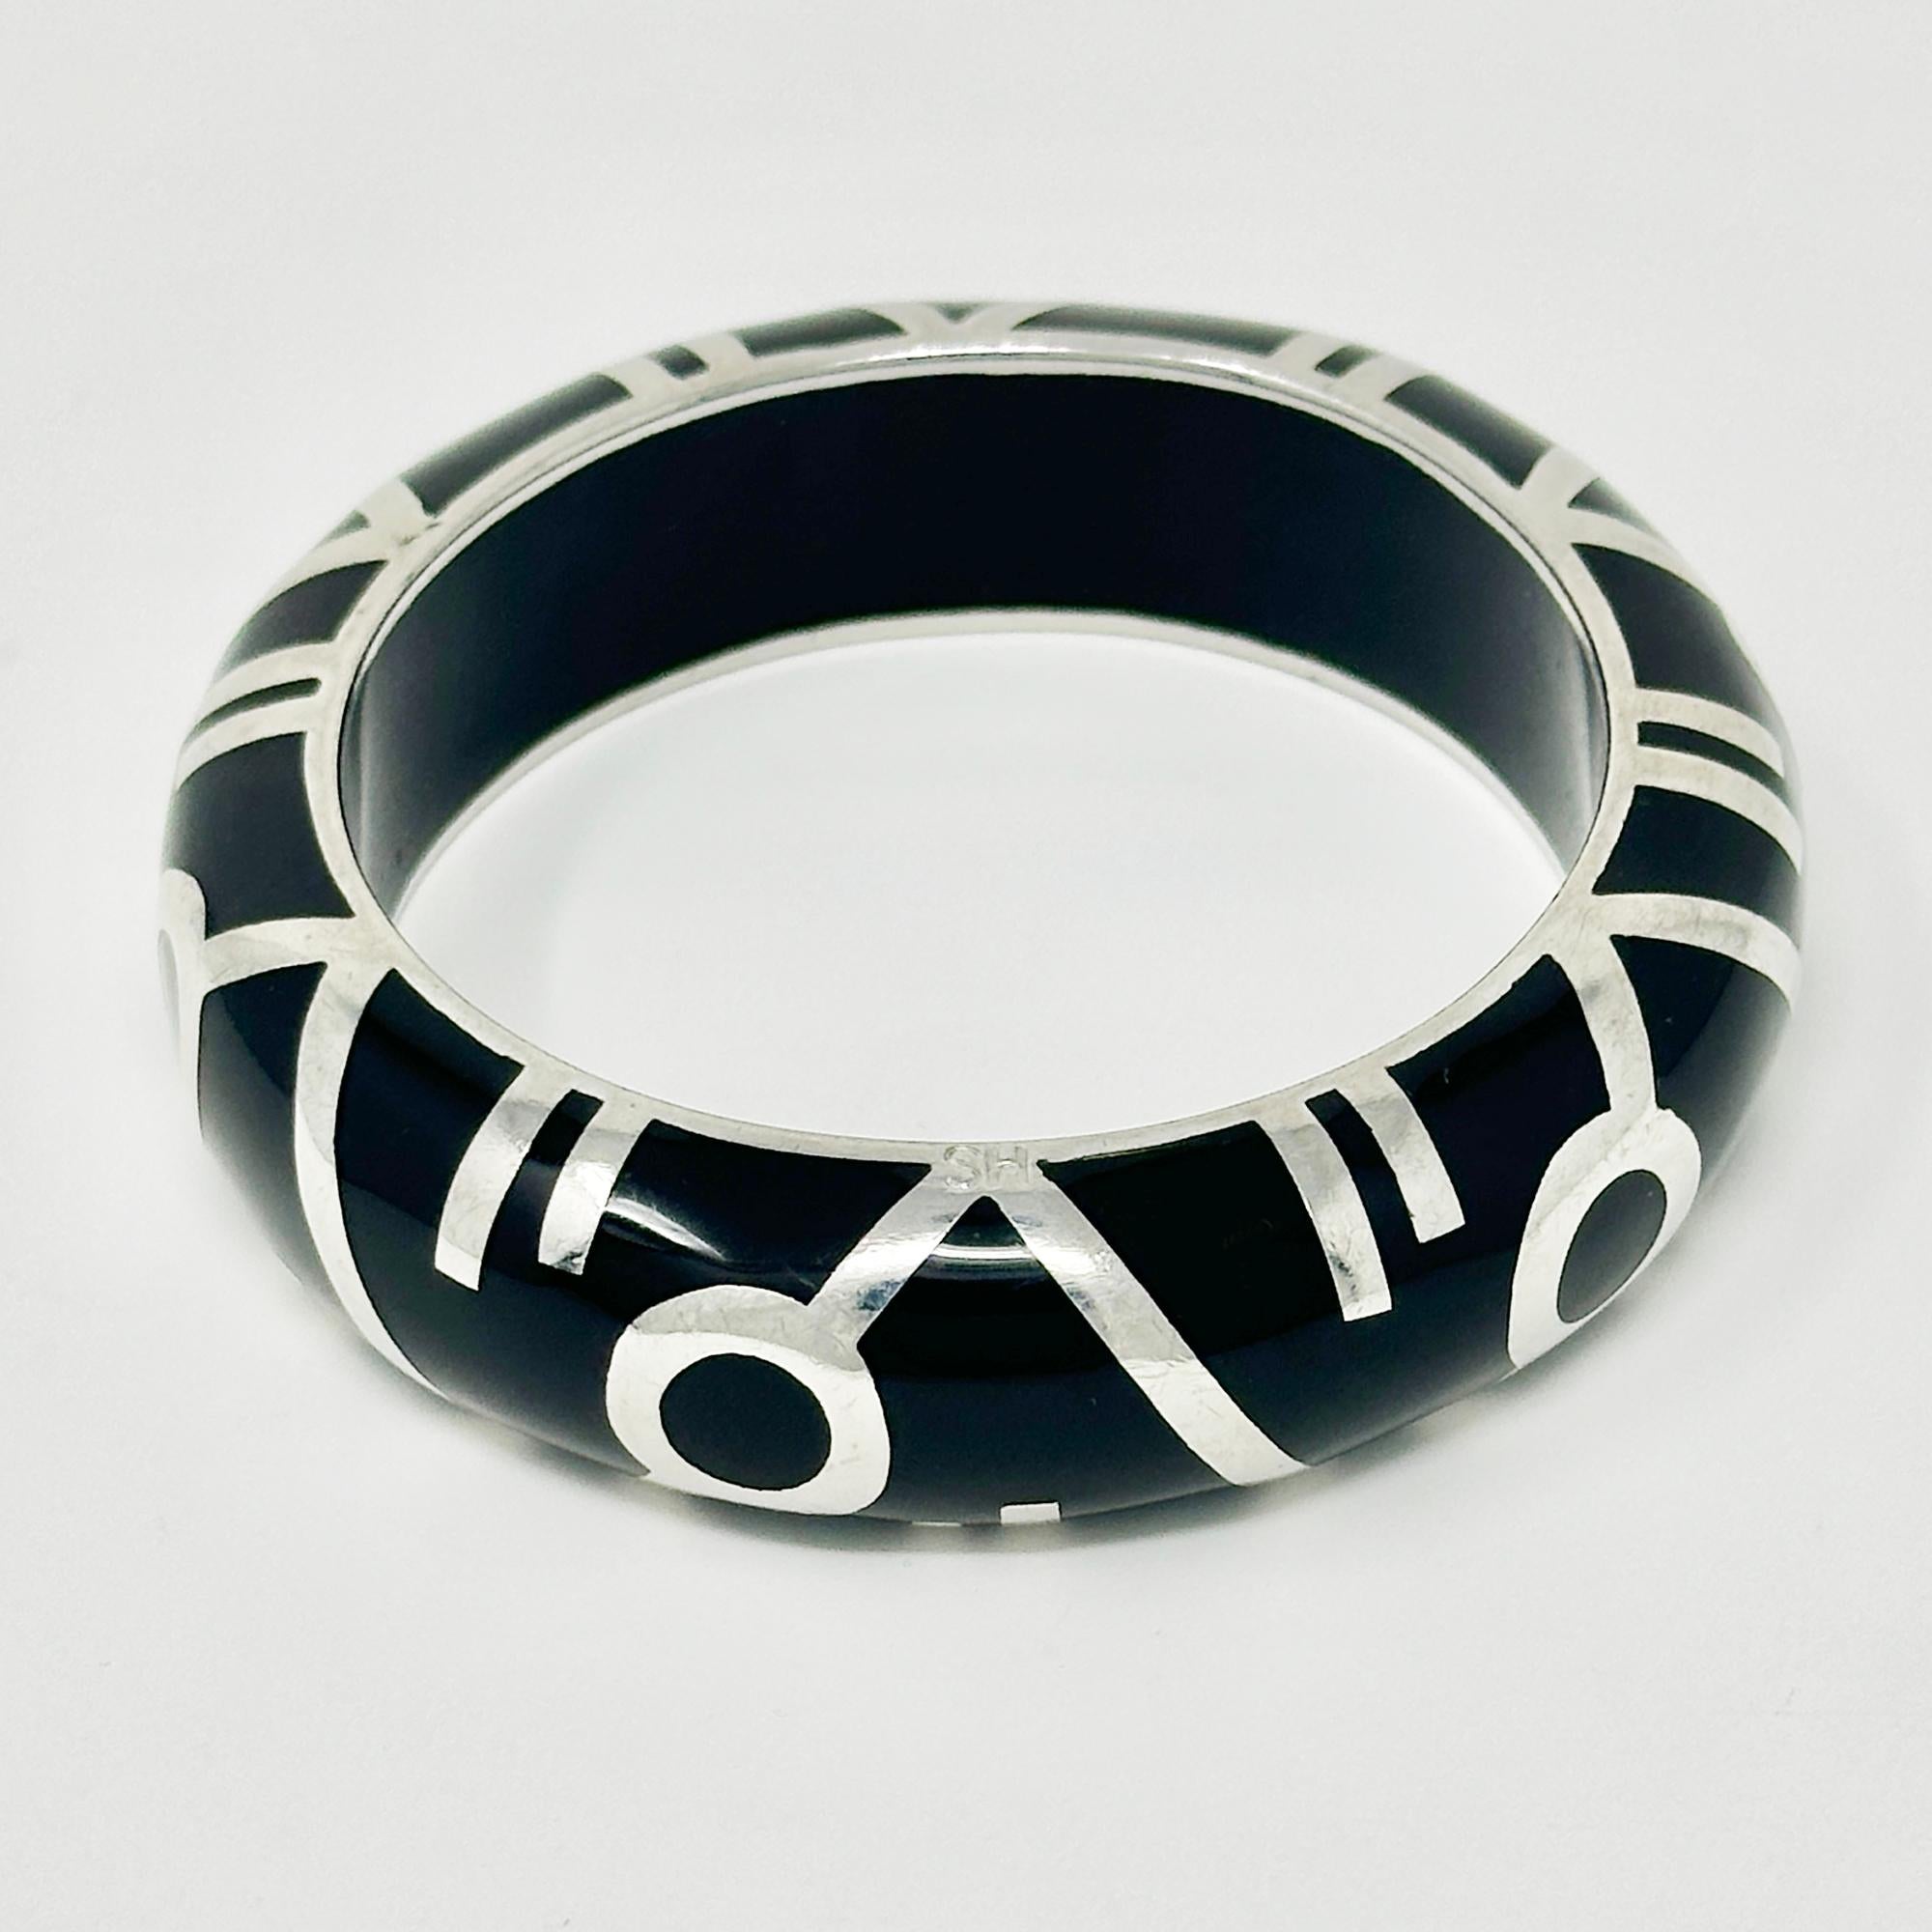 Sean Hill Silver and Resin Bracelet In Good Condition For Sale In Point Richmond, CA